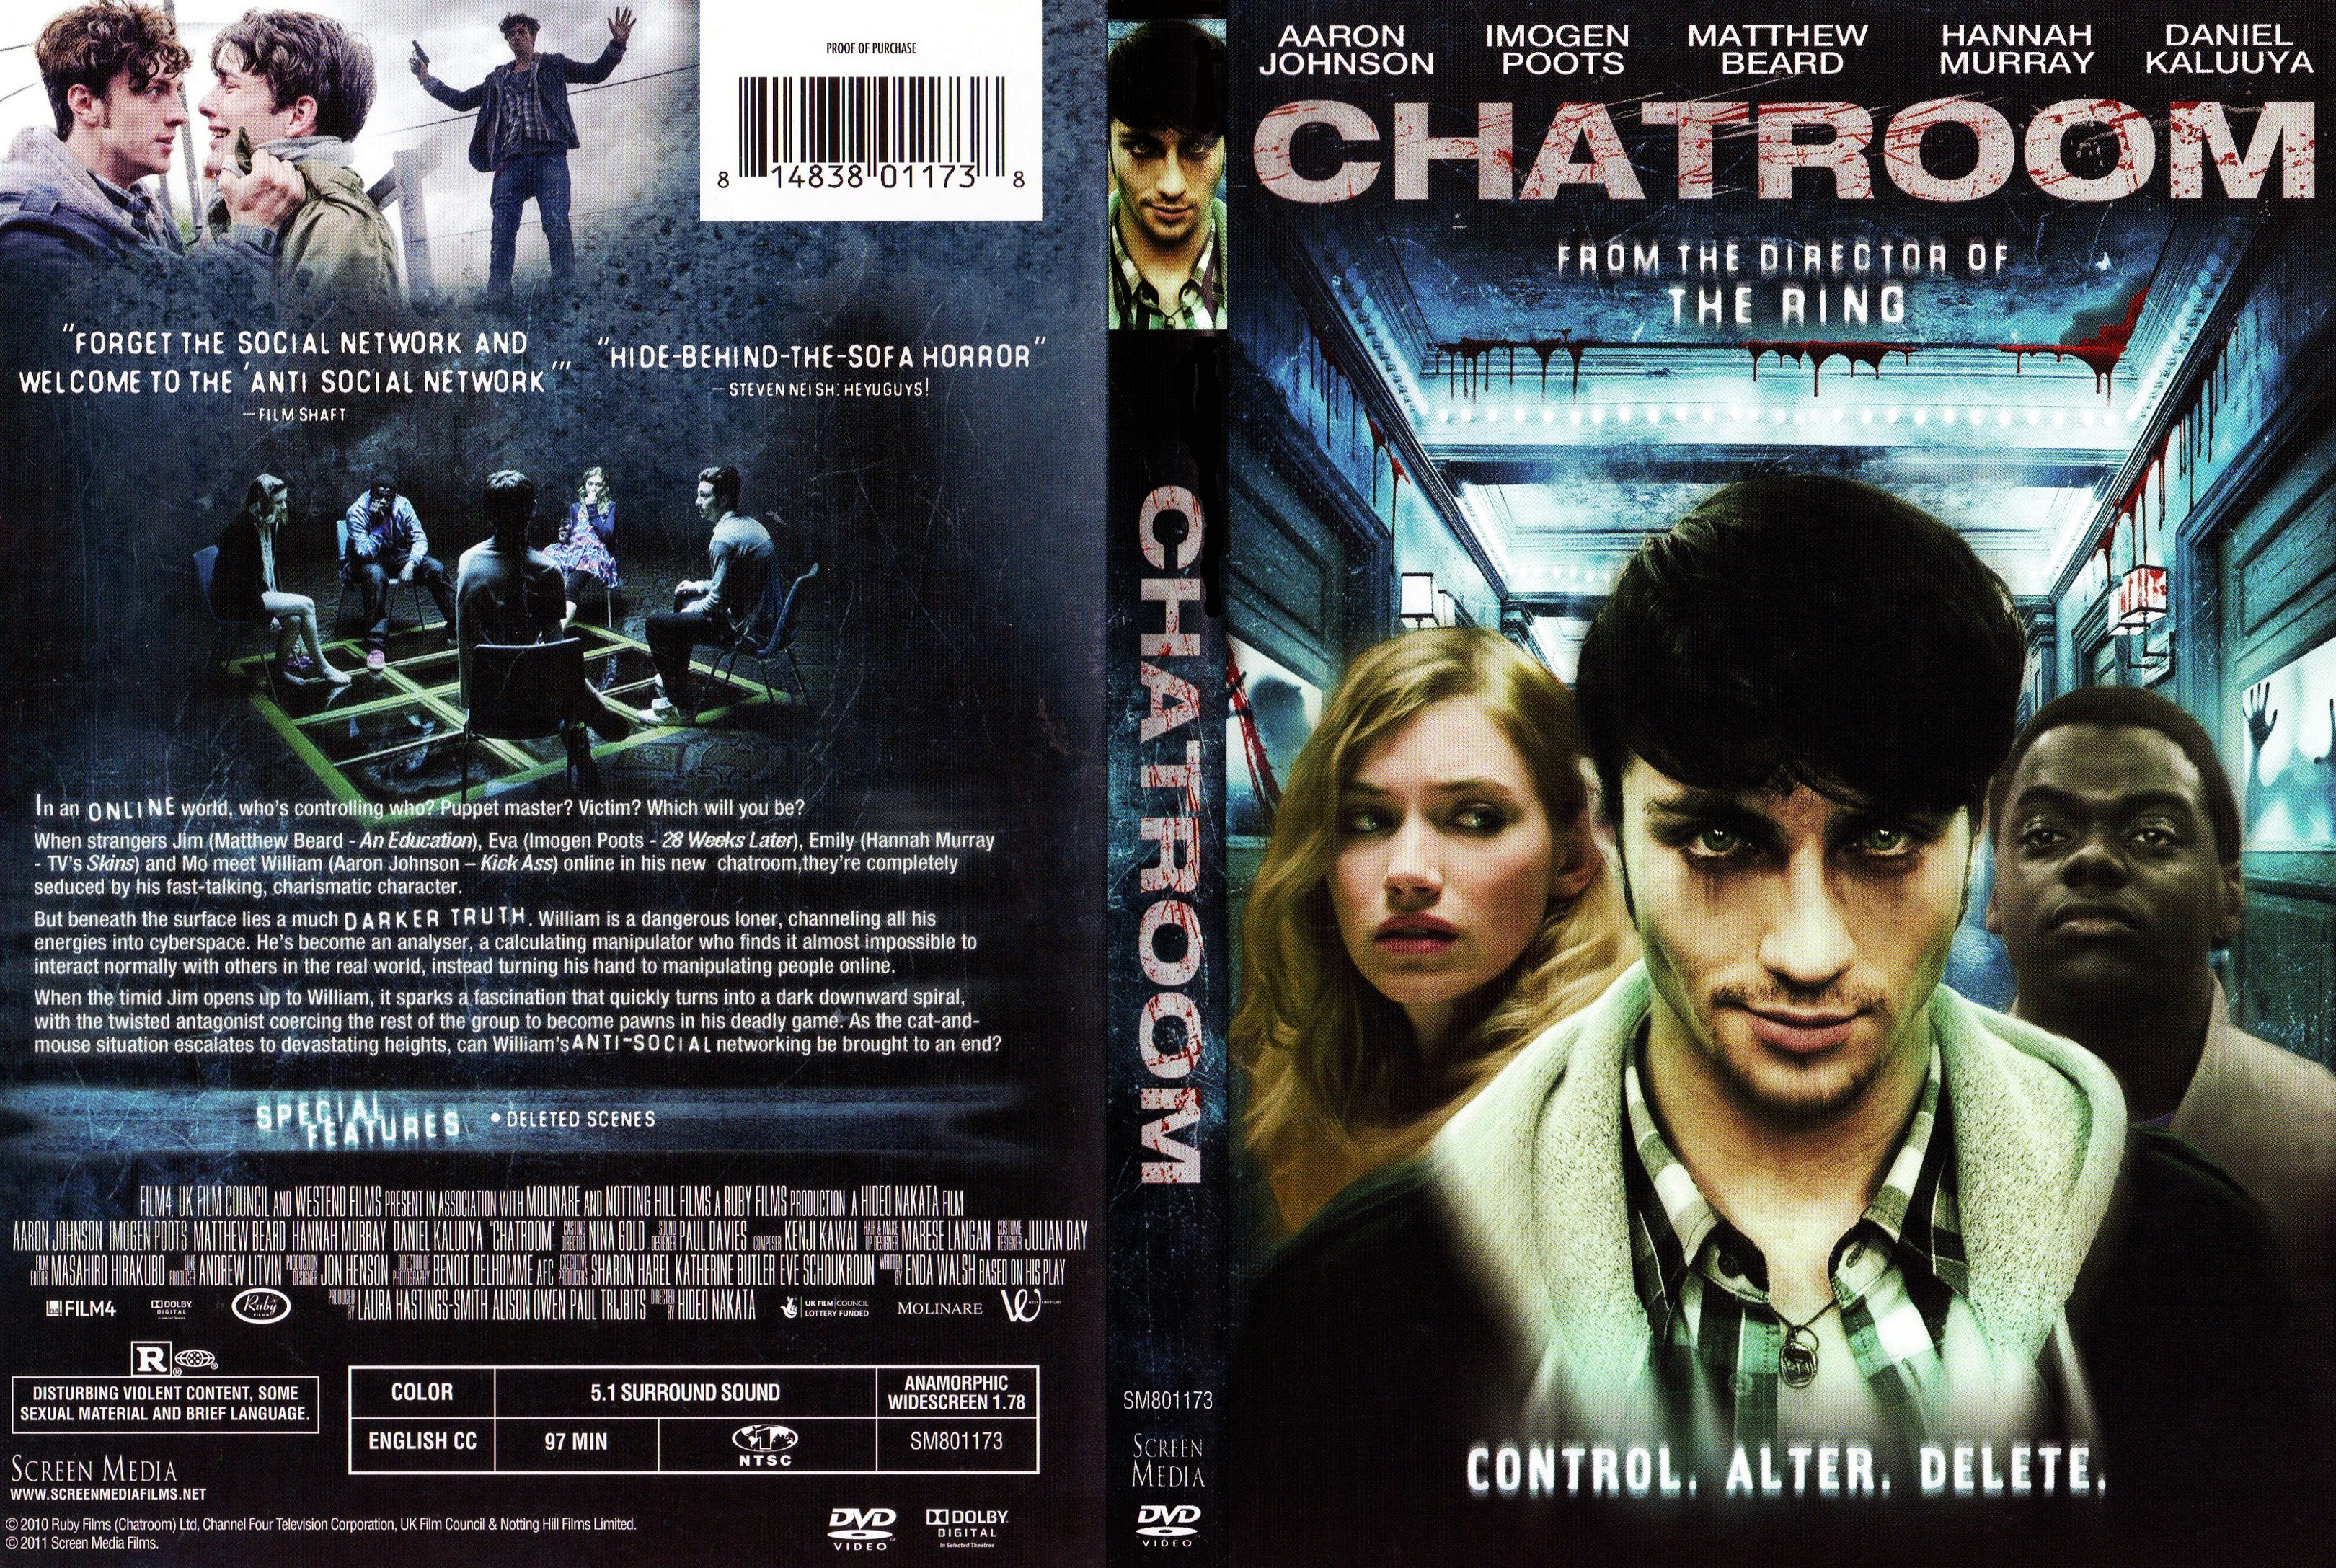 Jaquette DVD Chatroom Zone 1